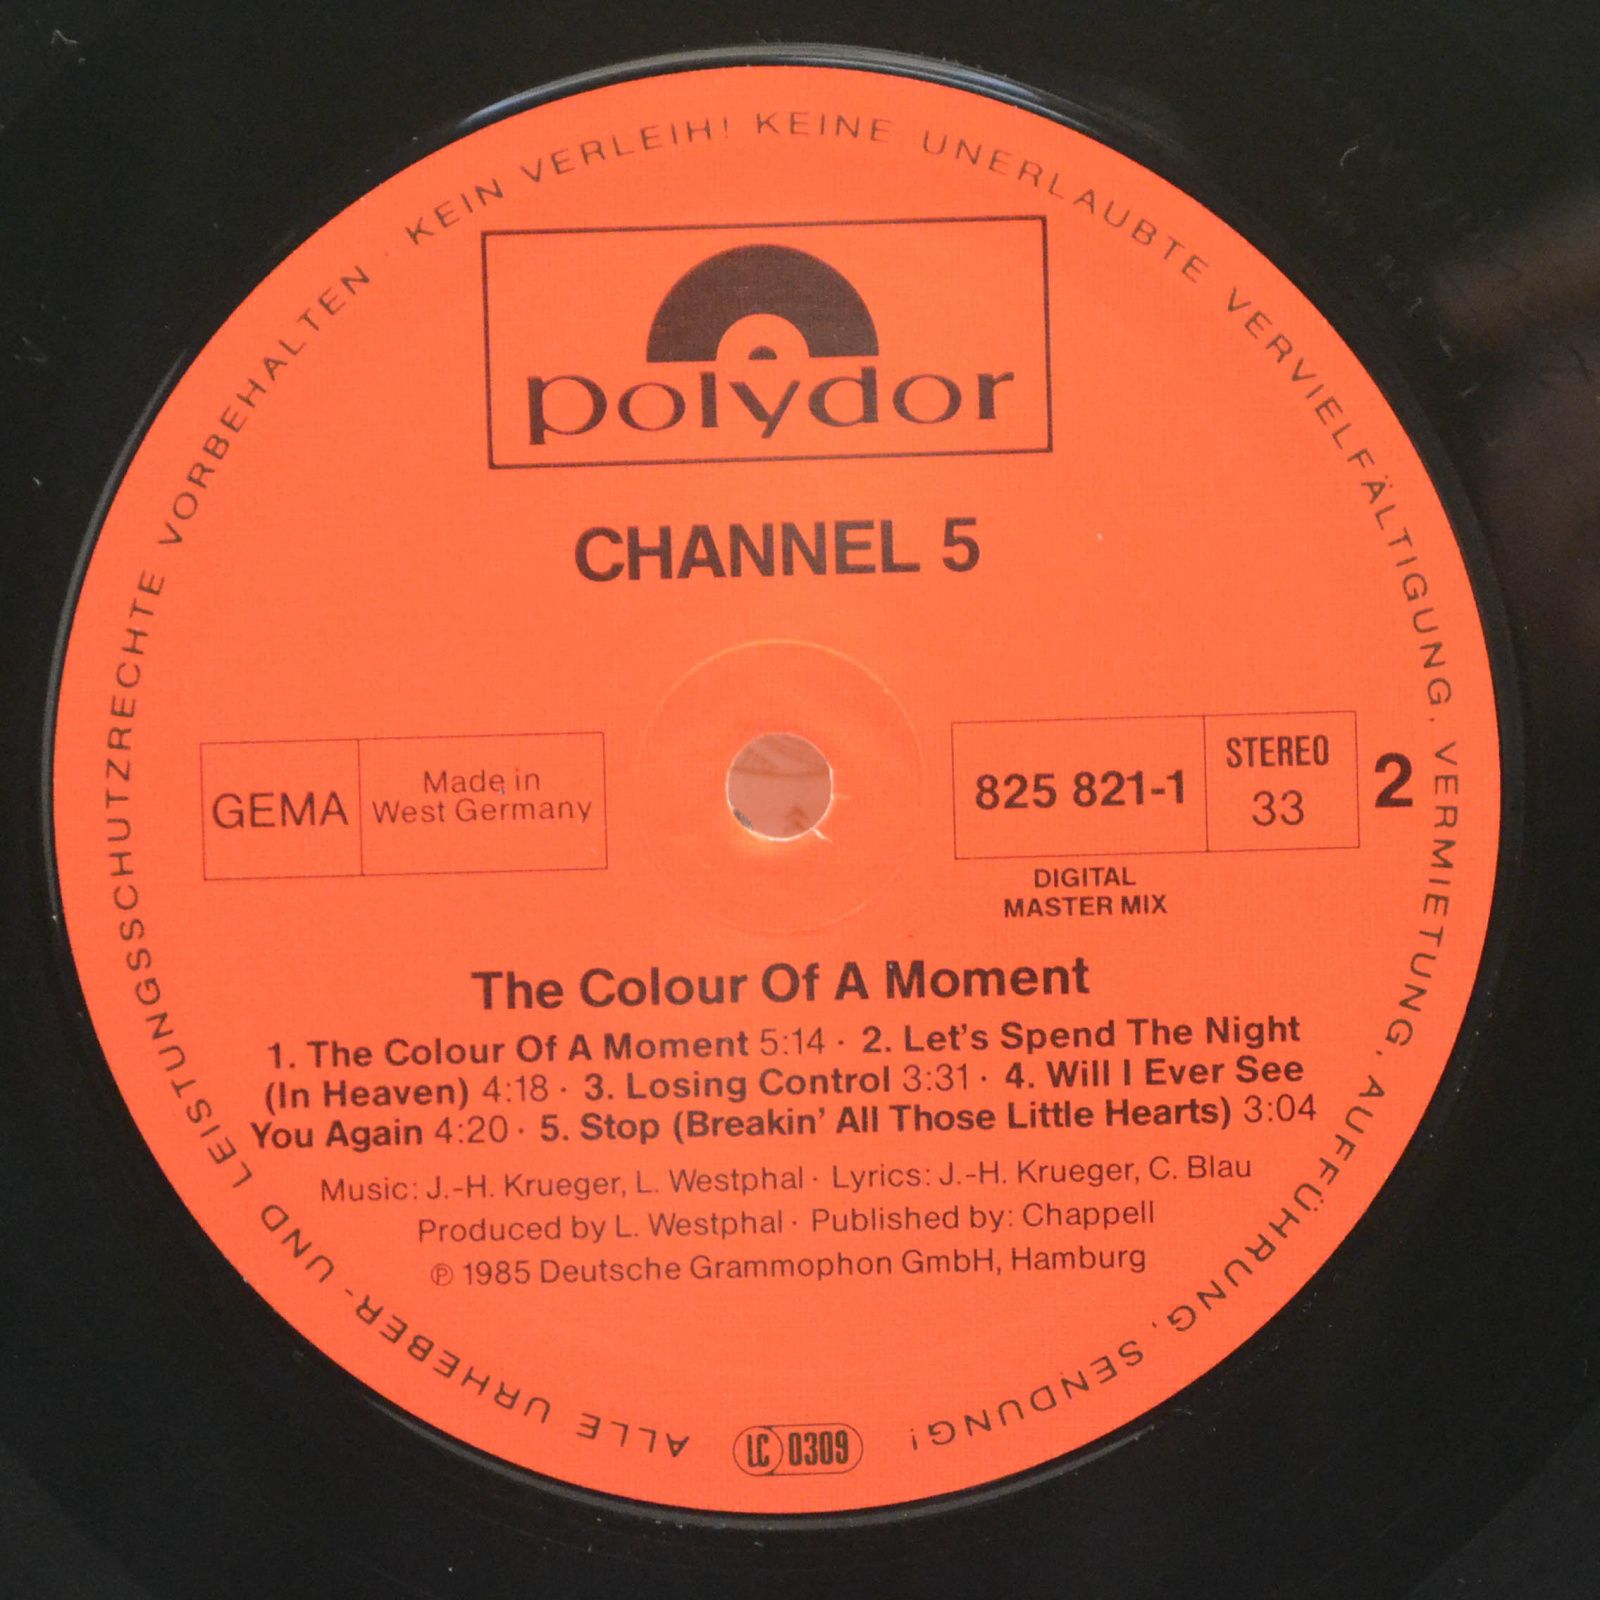 Channel 5 — The Colour Of A Moment, 1985